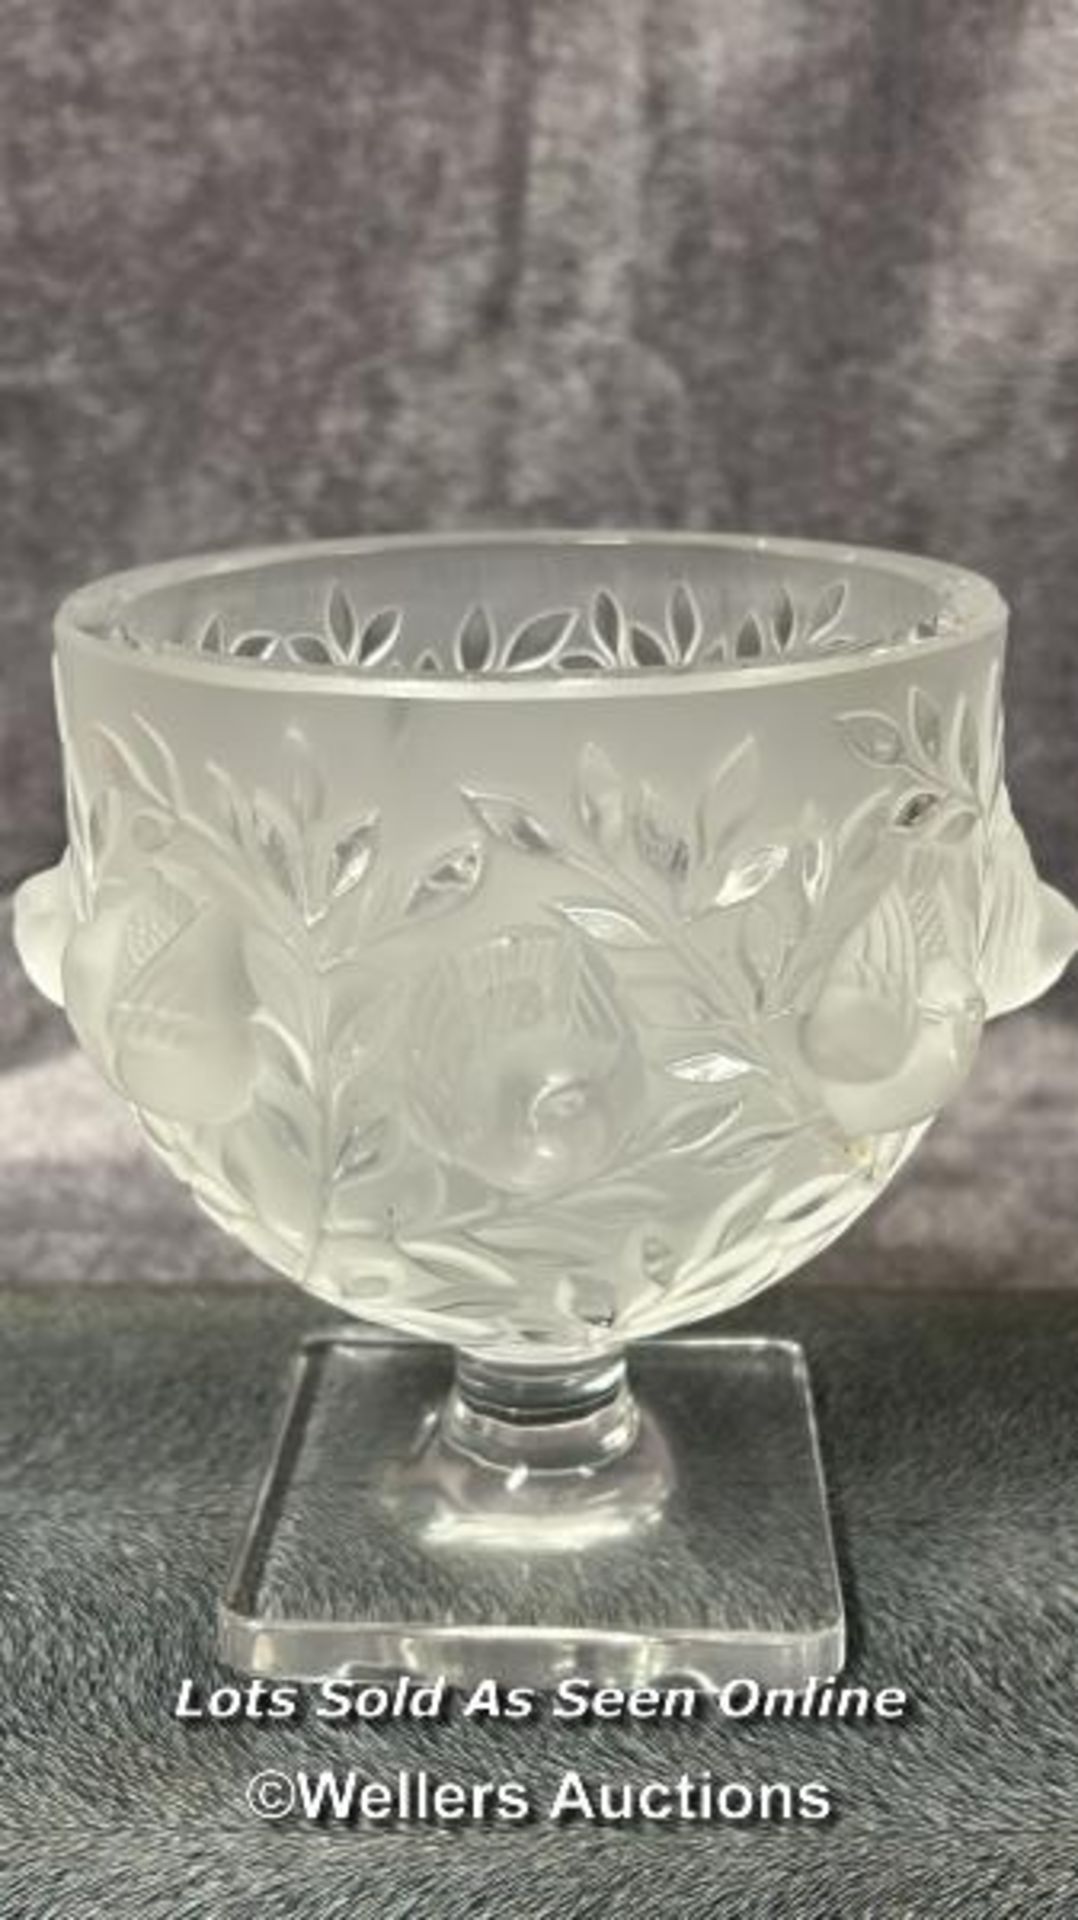 Lalique France 'Elizabeth' frosted crystal vase decorated with birds and vines, 13.5cm high, - Image 2 of 4